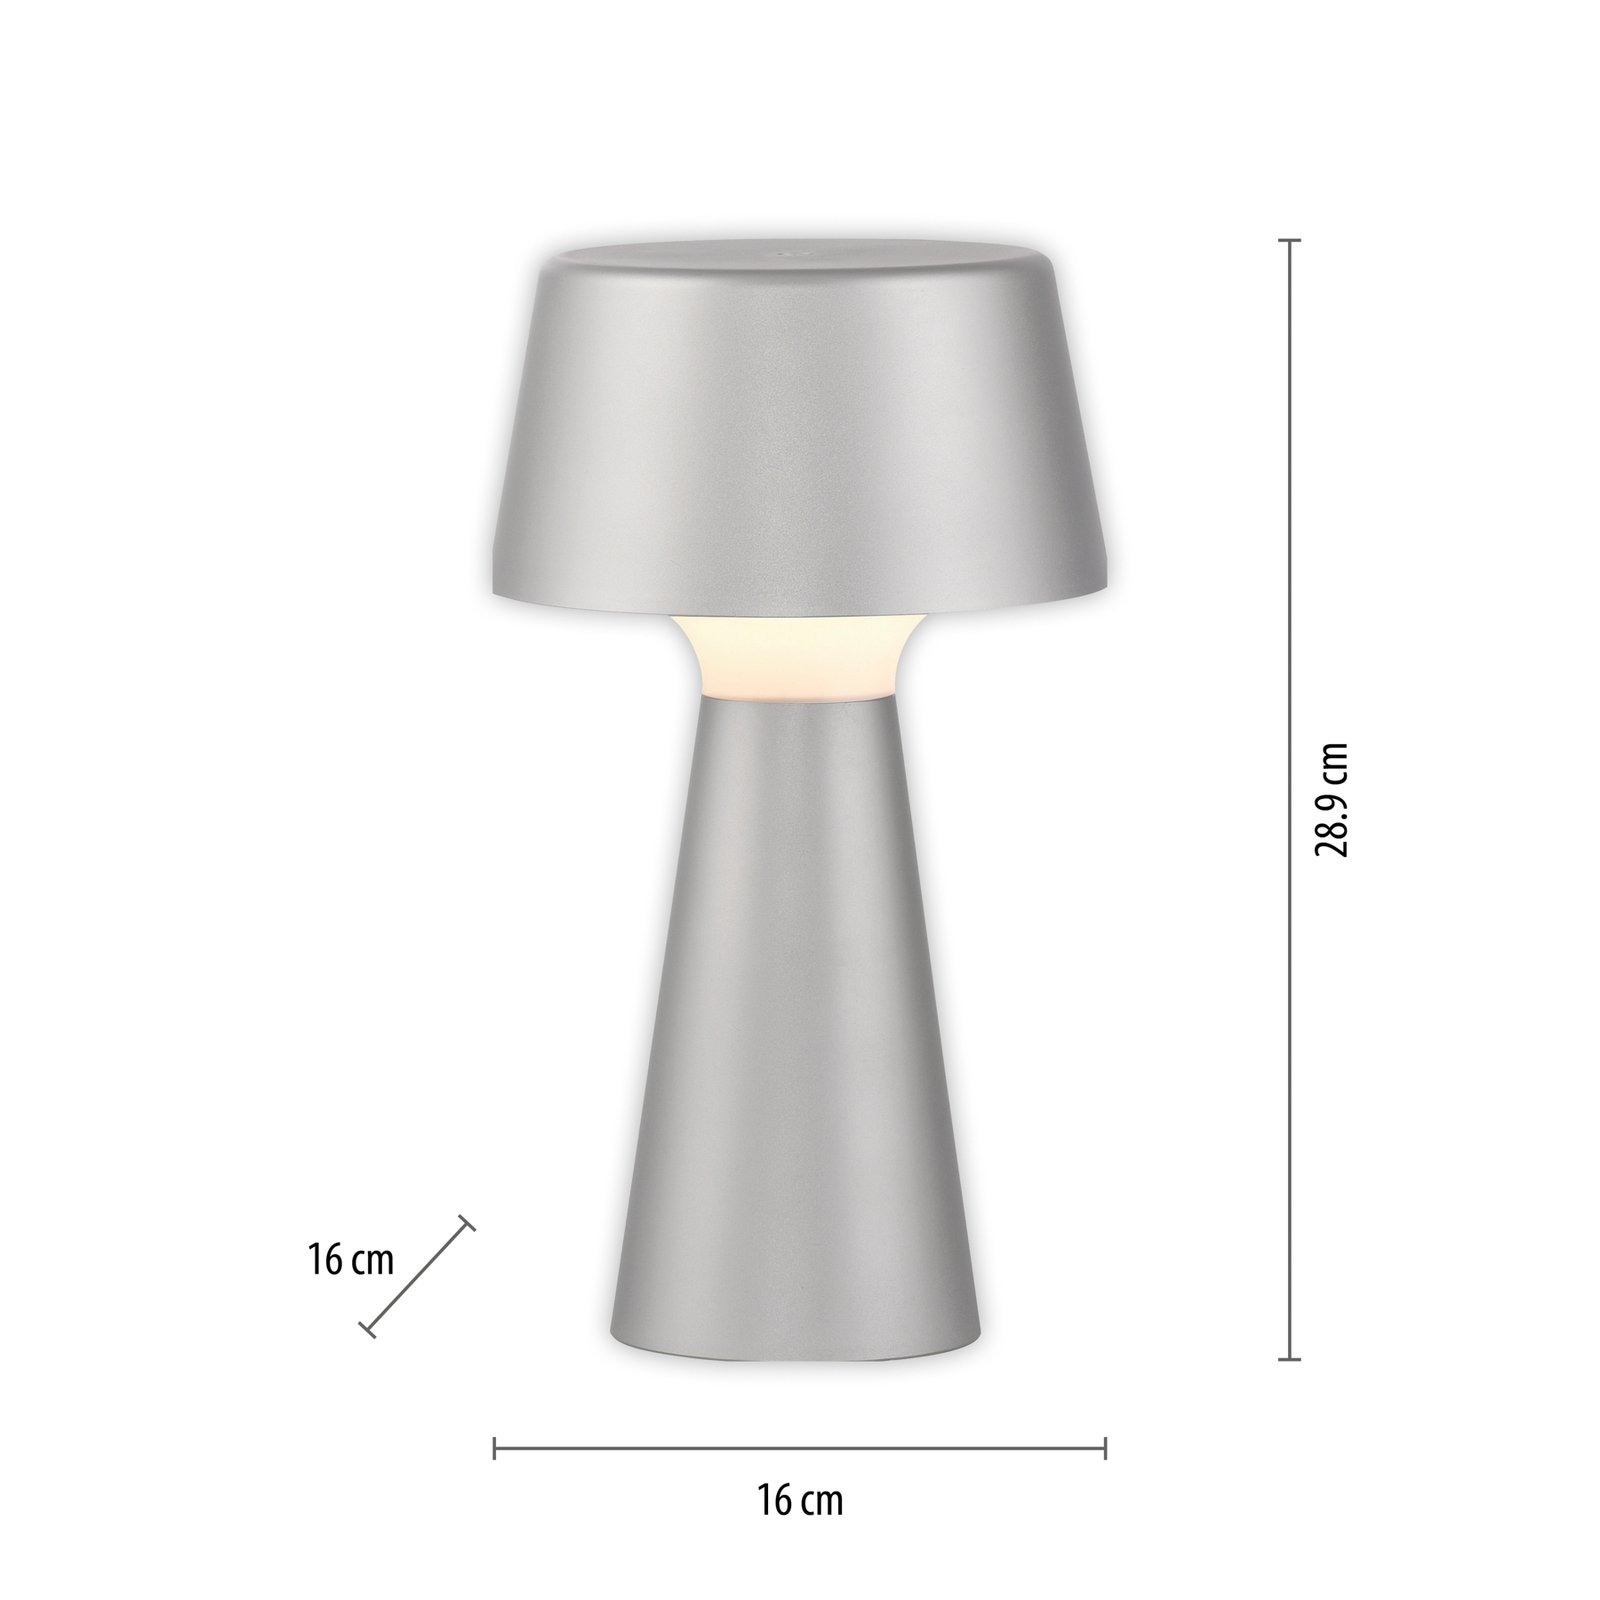 JUST LIGHT. Abera silver plastic IP54 rechargeable LED table lamp